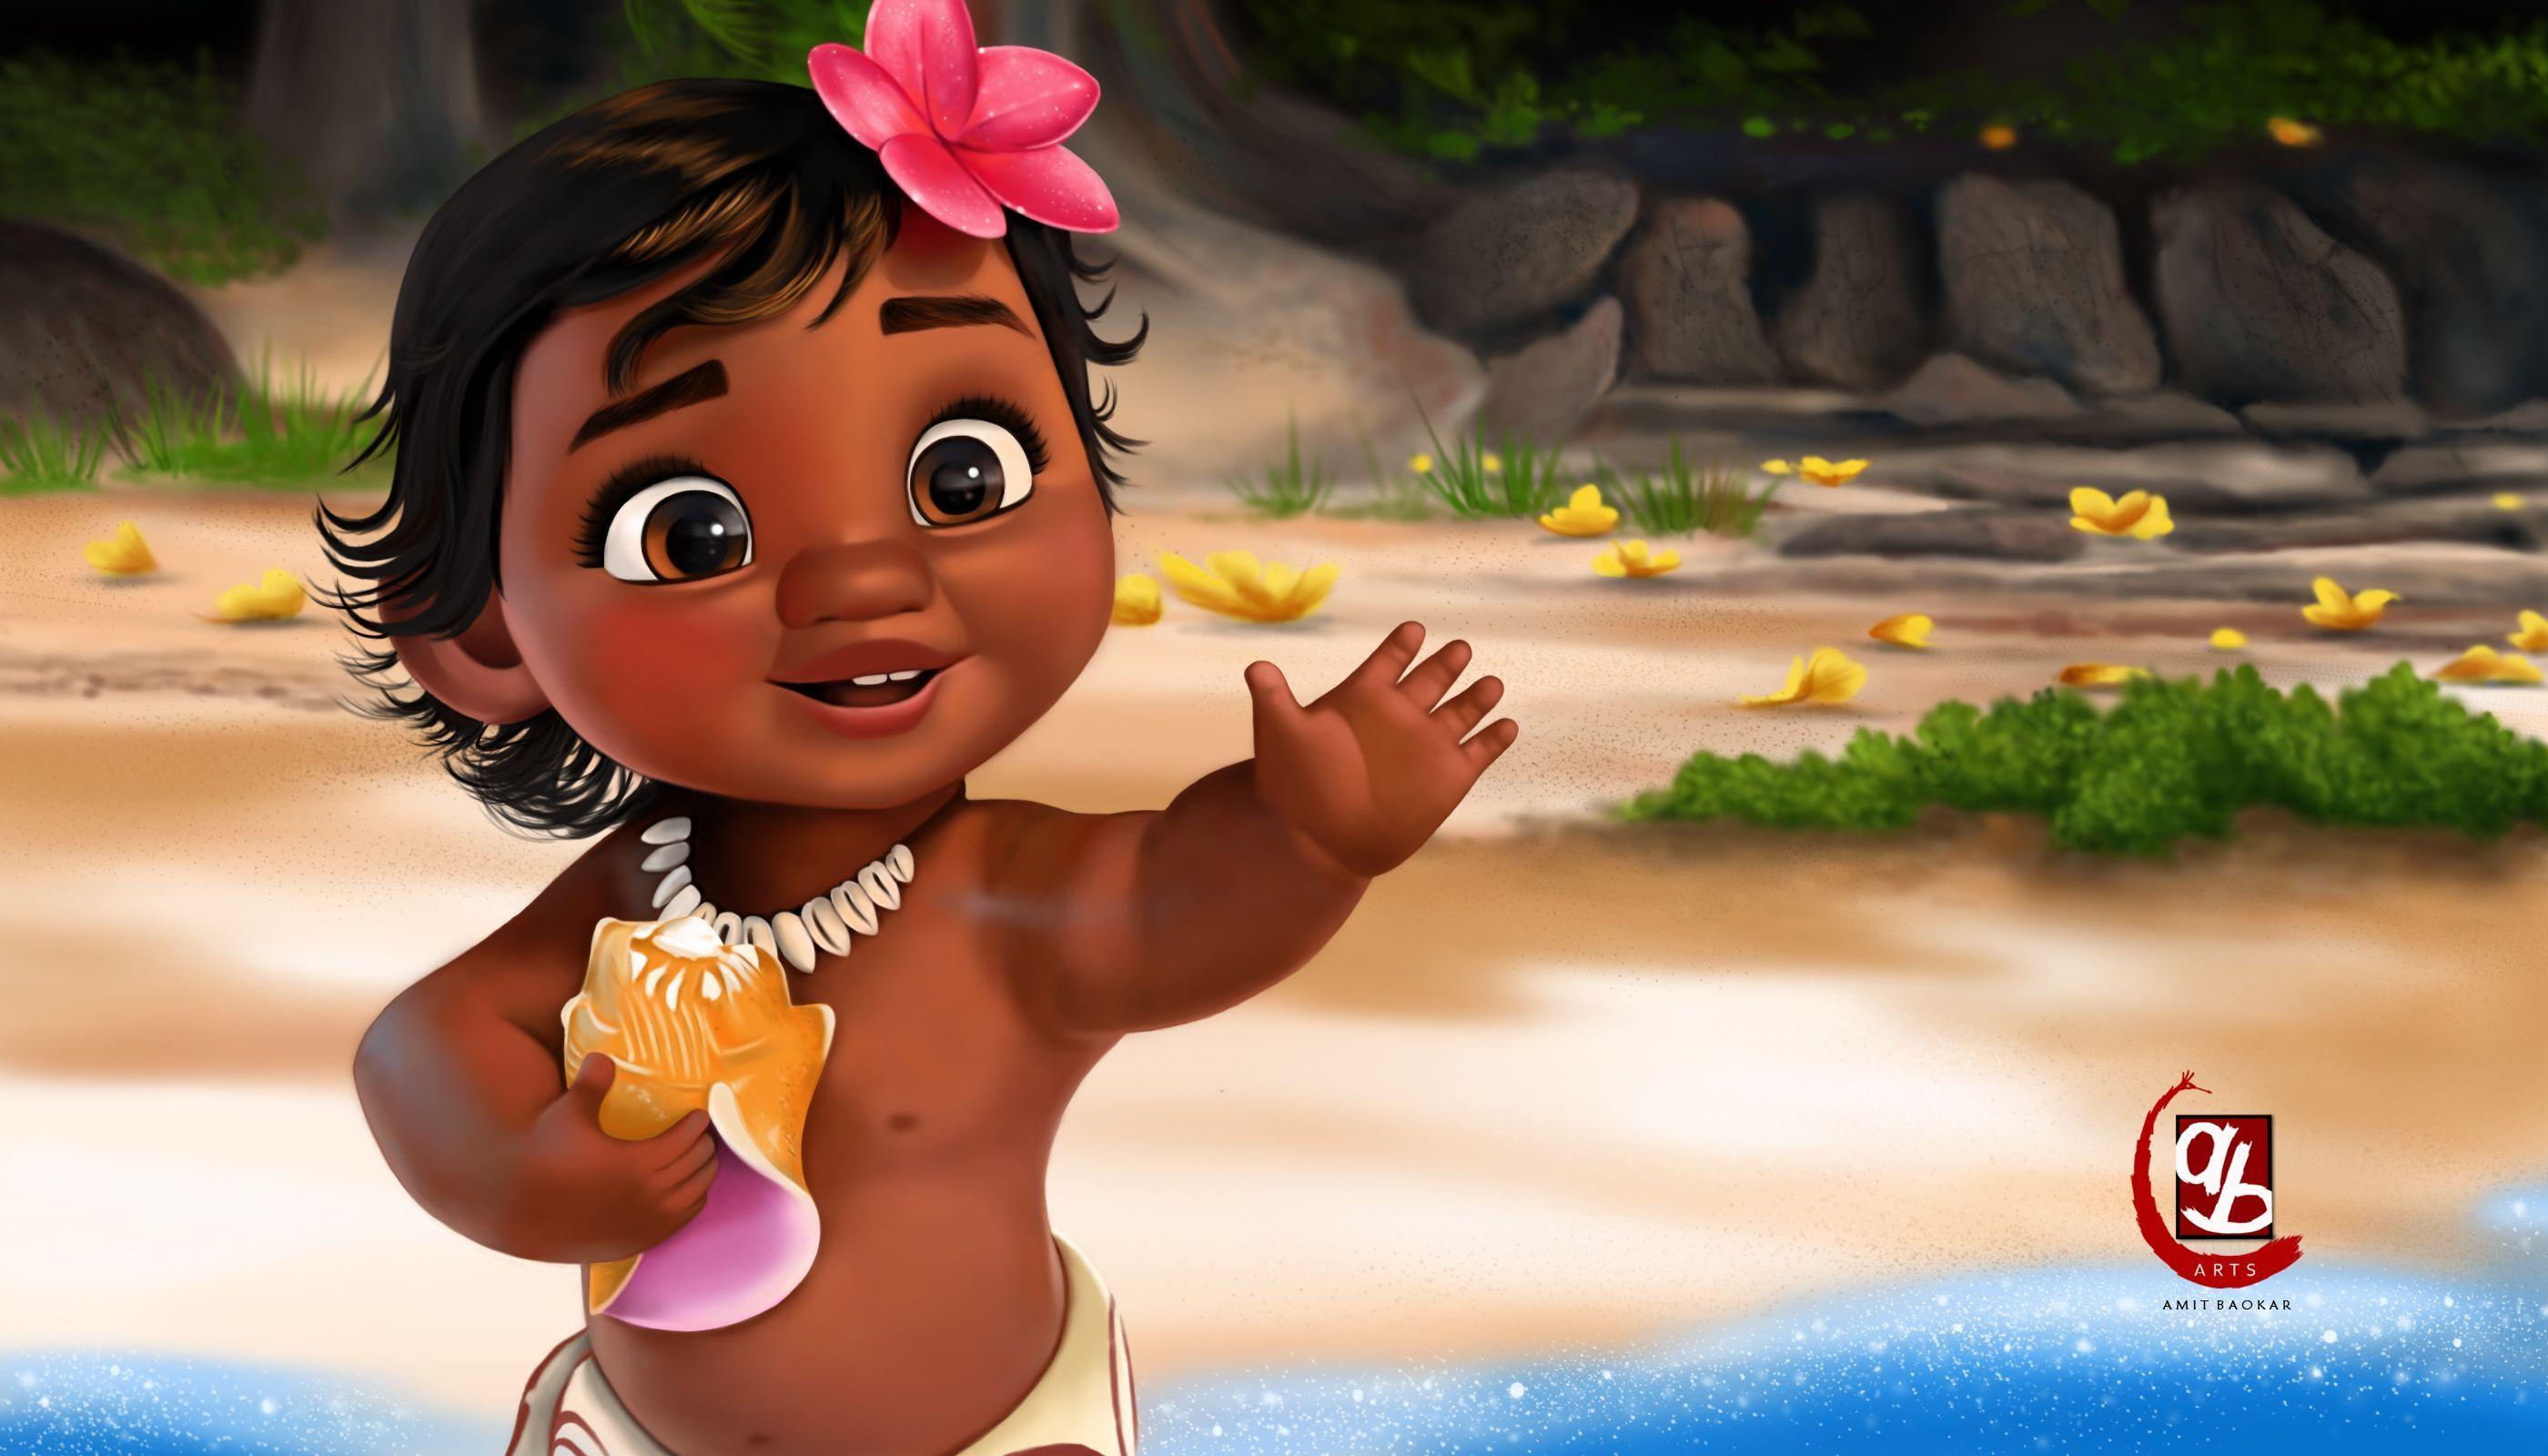 Moana Wallpapers (40+ images inside)